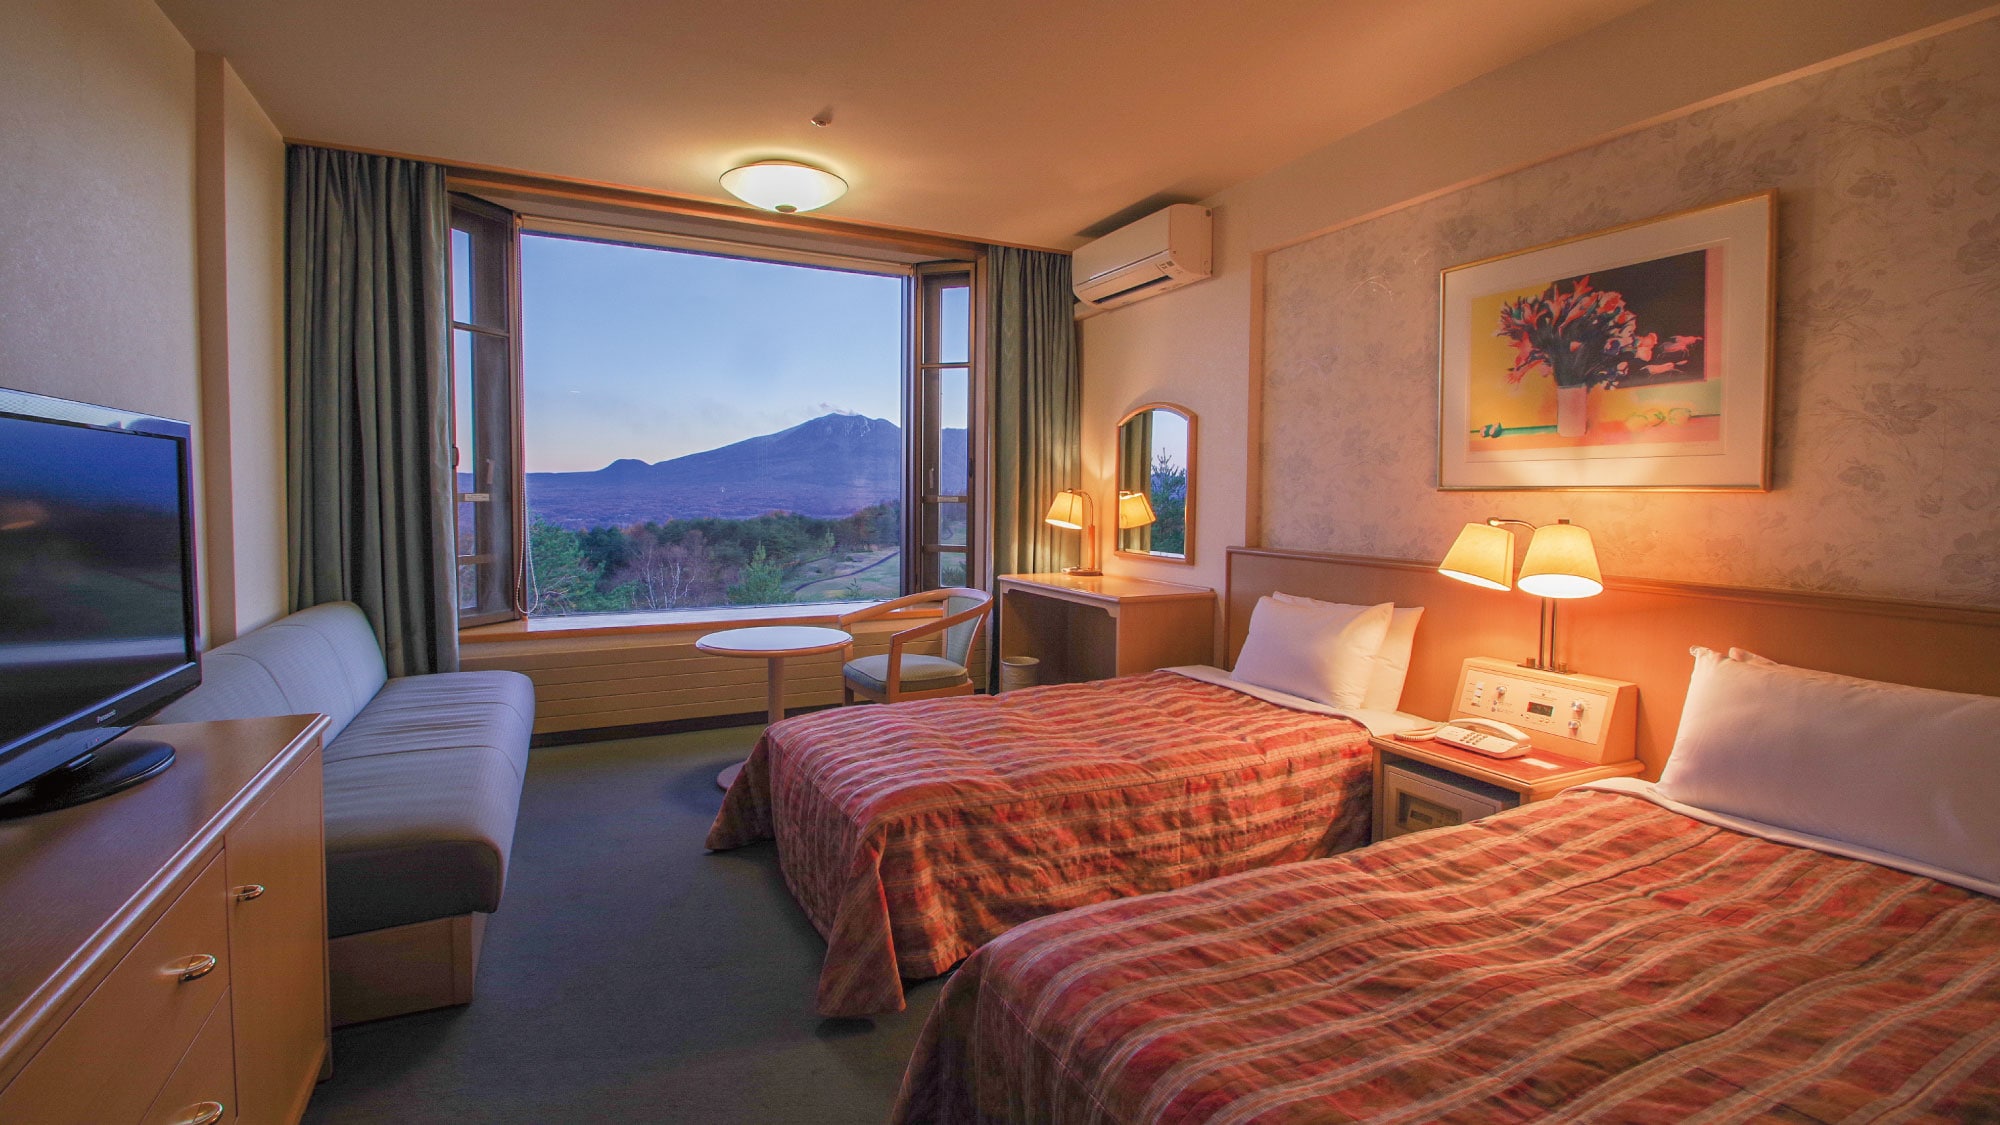 [Twin room] You can see the magnificent scenery from the large bay window.